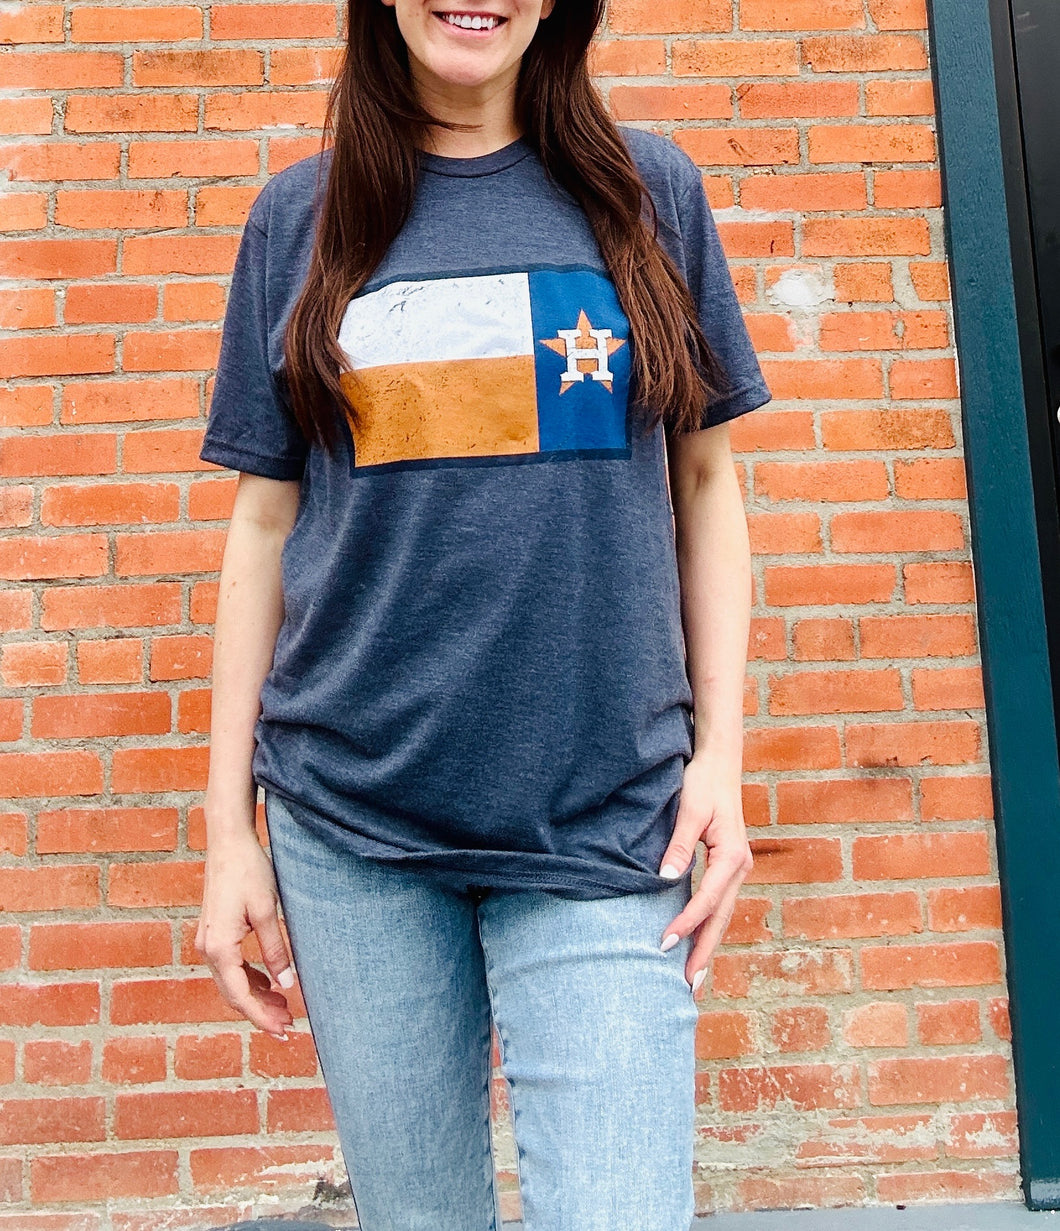 Astros Forever Unisex Adult & Youth Tee [2 Colors]